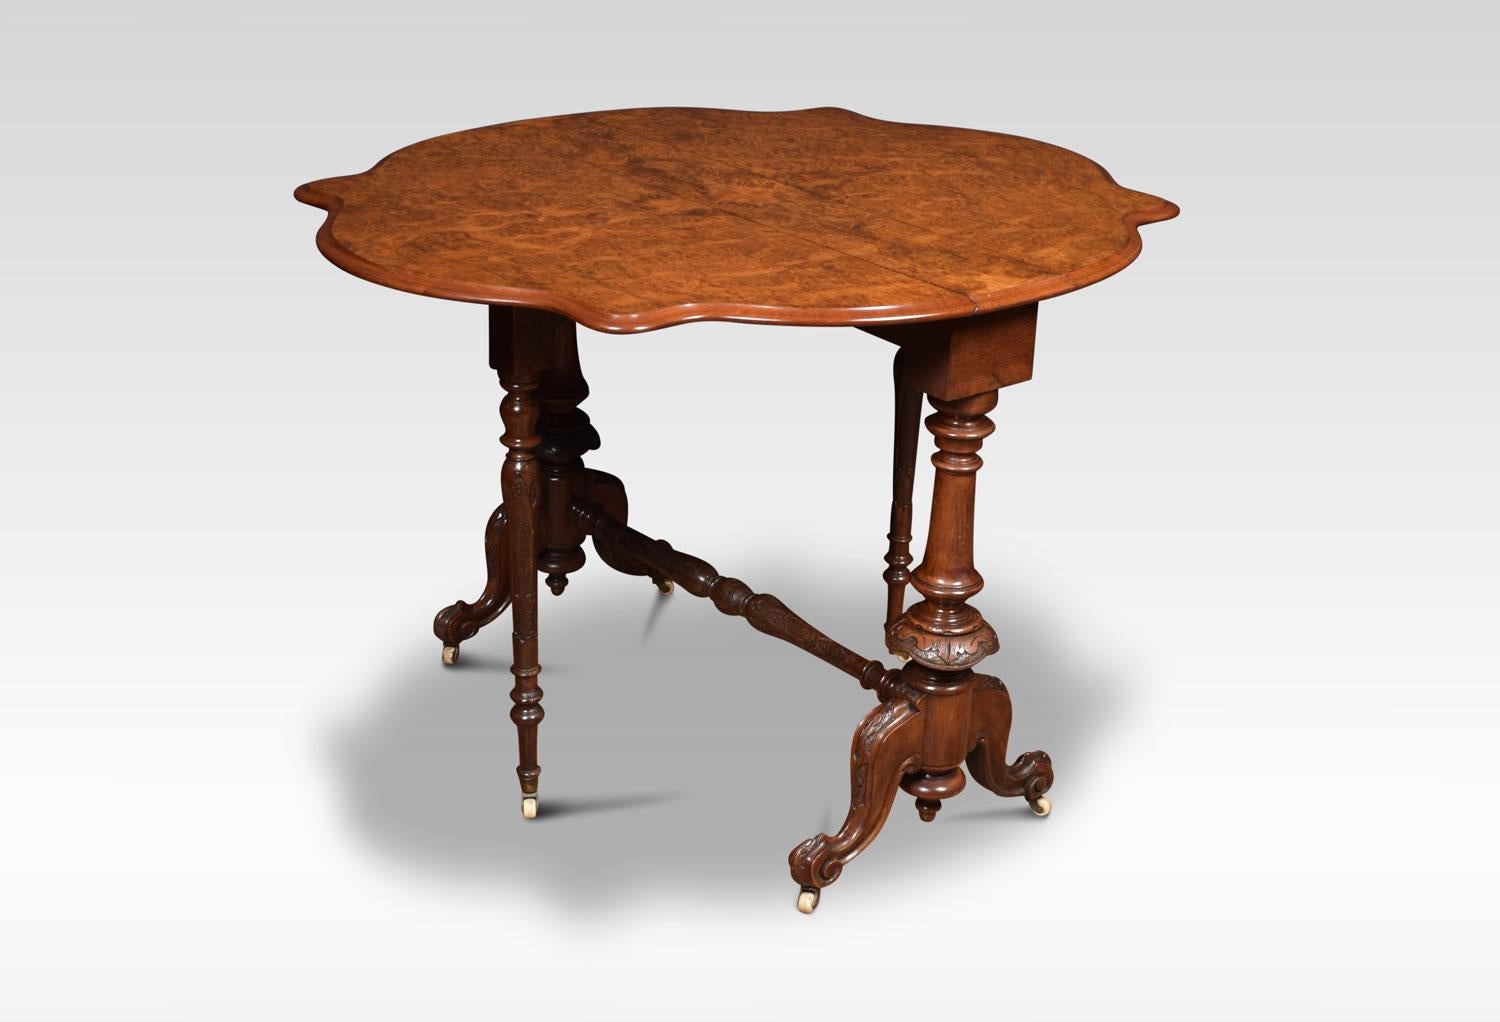 Victorian figured walnut Sutherland table, the shaped top with two impressive burr walnut leaves. Supported on two turned supports united by stretcher.
Dimensions:
Height 27.5 inches
Width 36 inches
Depth 6.5 inches / when end are up 41 inches.